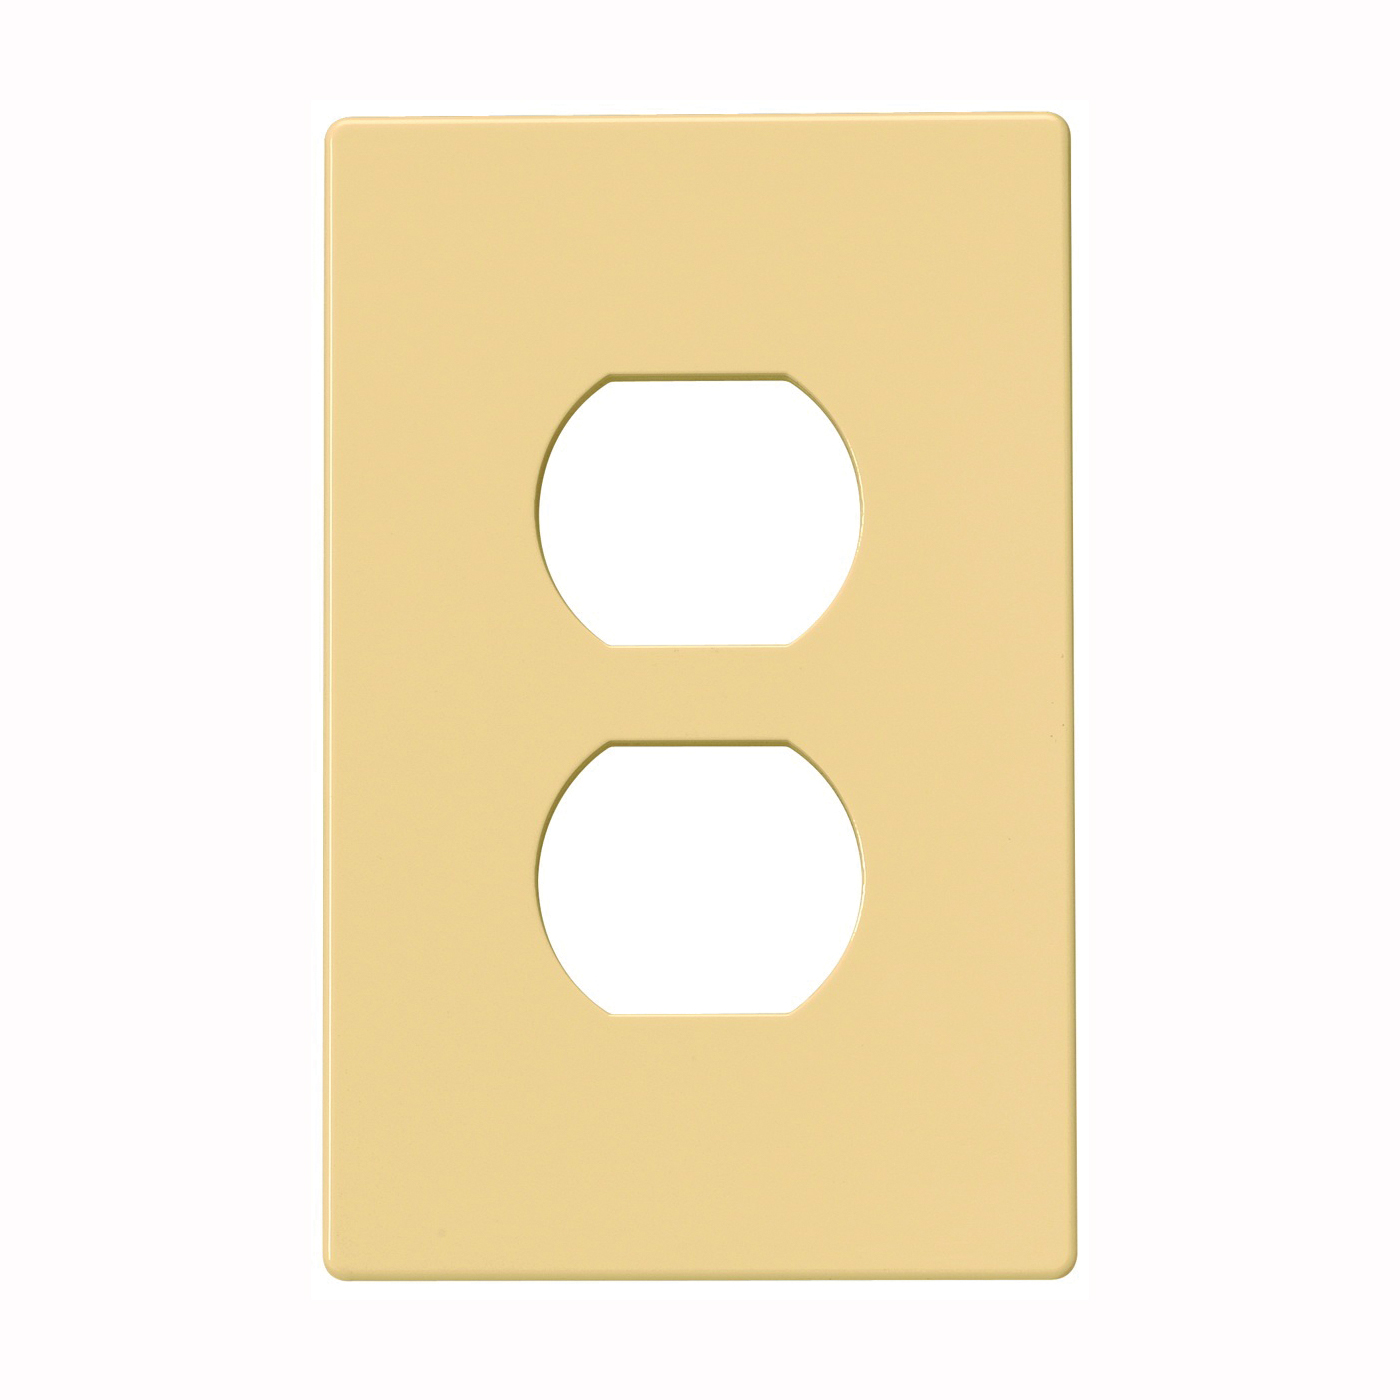 PJS8V Wallplate, 4-1/2 in L, 2-3/4 in W, 1 -Gang, Polycarbonate, Ivory, High-Gloss